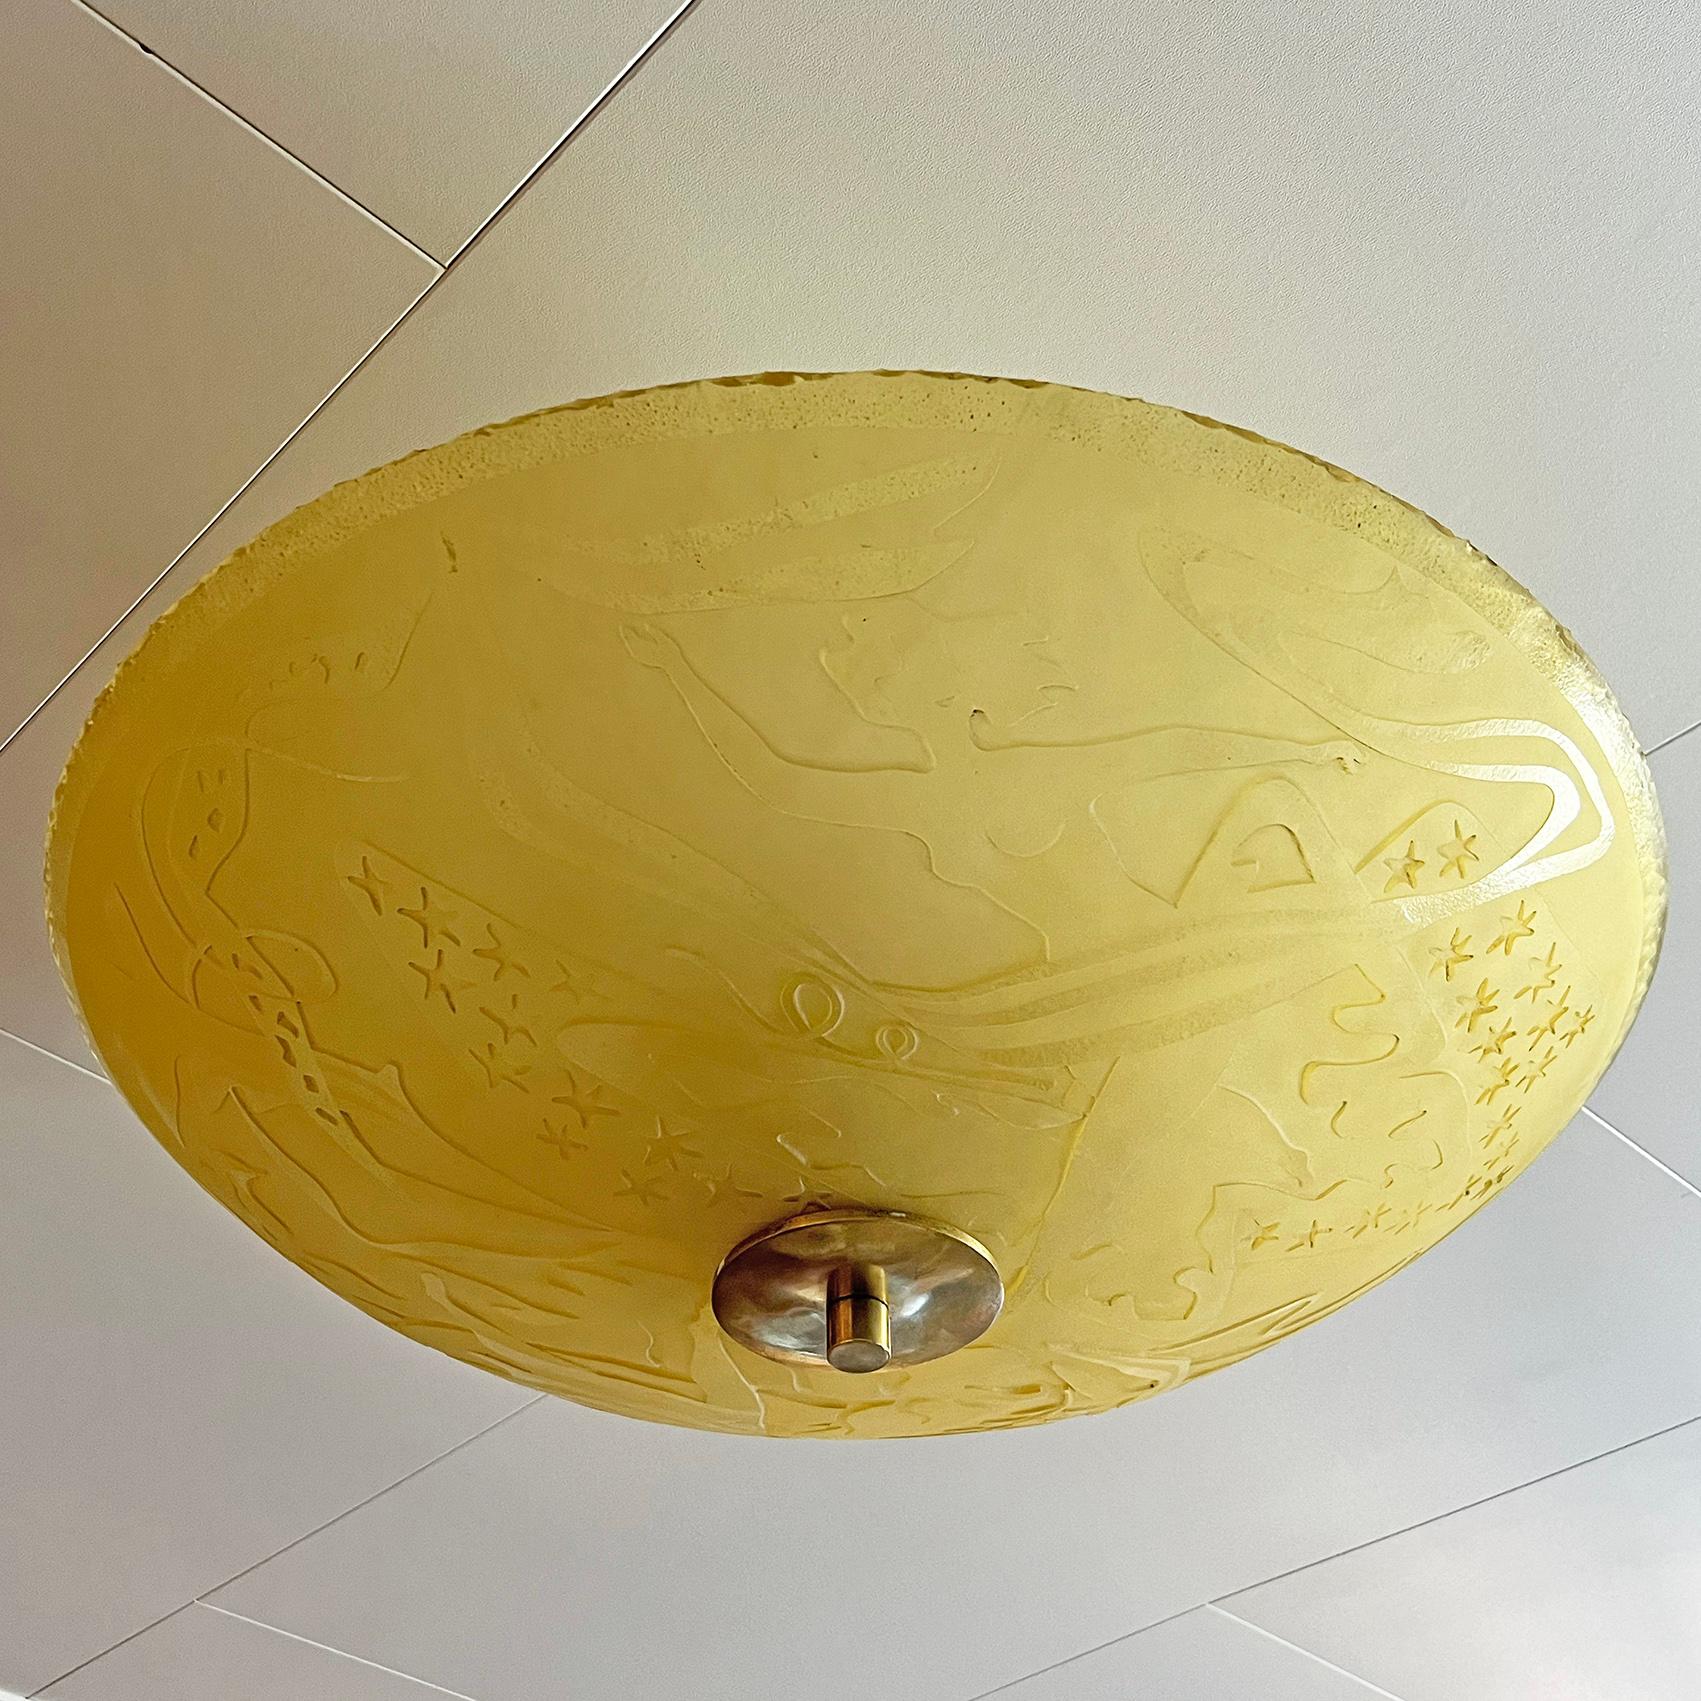 Swedish Scandinavian Modern Etched Glass Ceiling Light, Most Likely Glössner ca 1940's For Sale